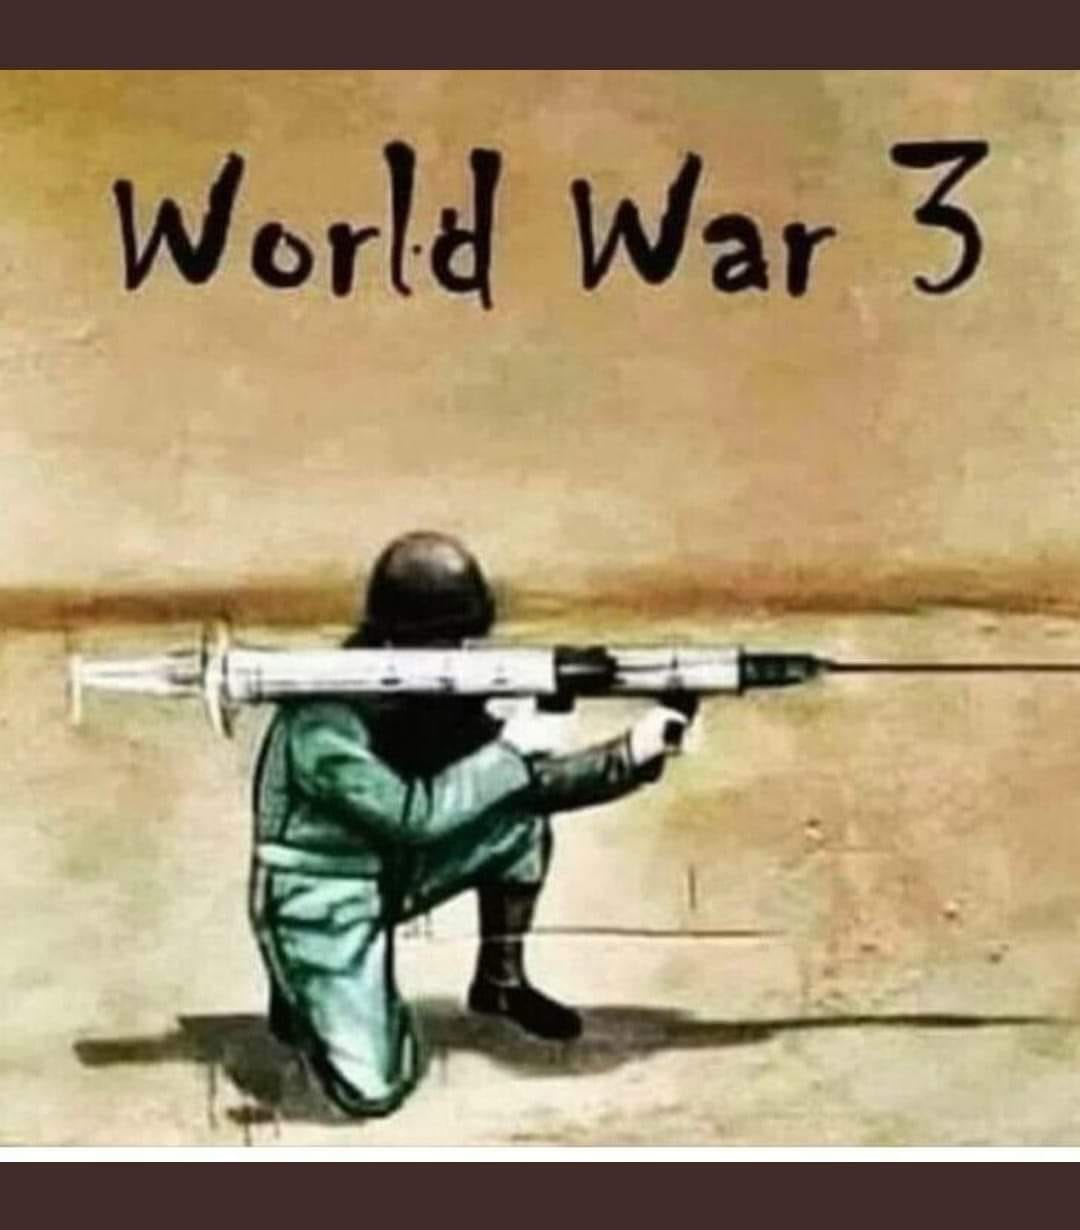 May be an image of text that says 'World War 3'